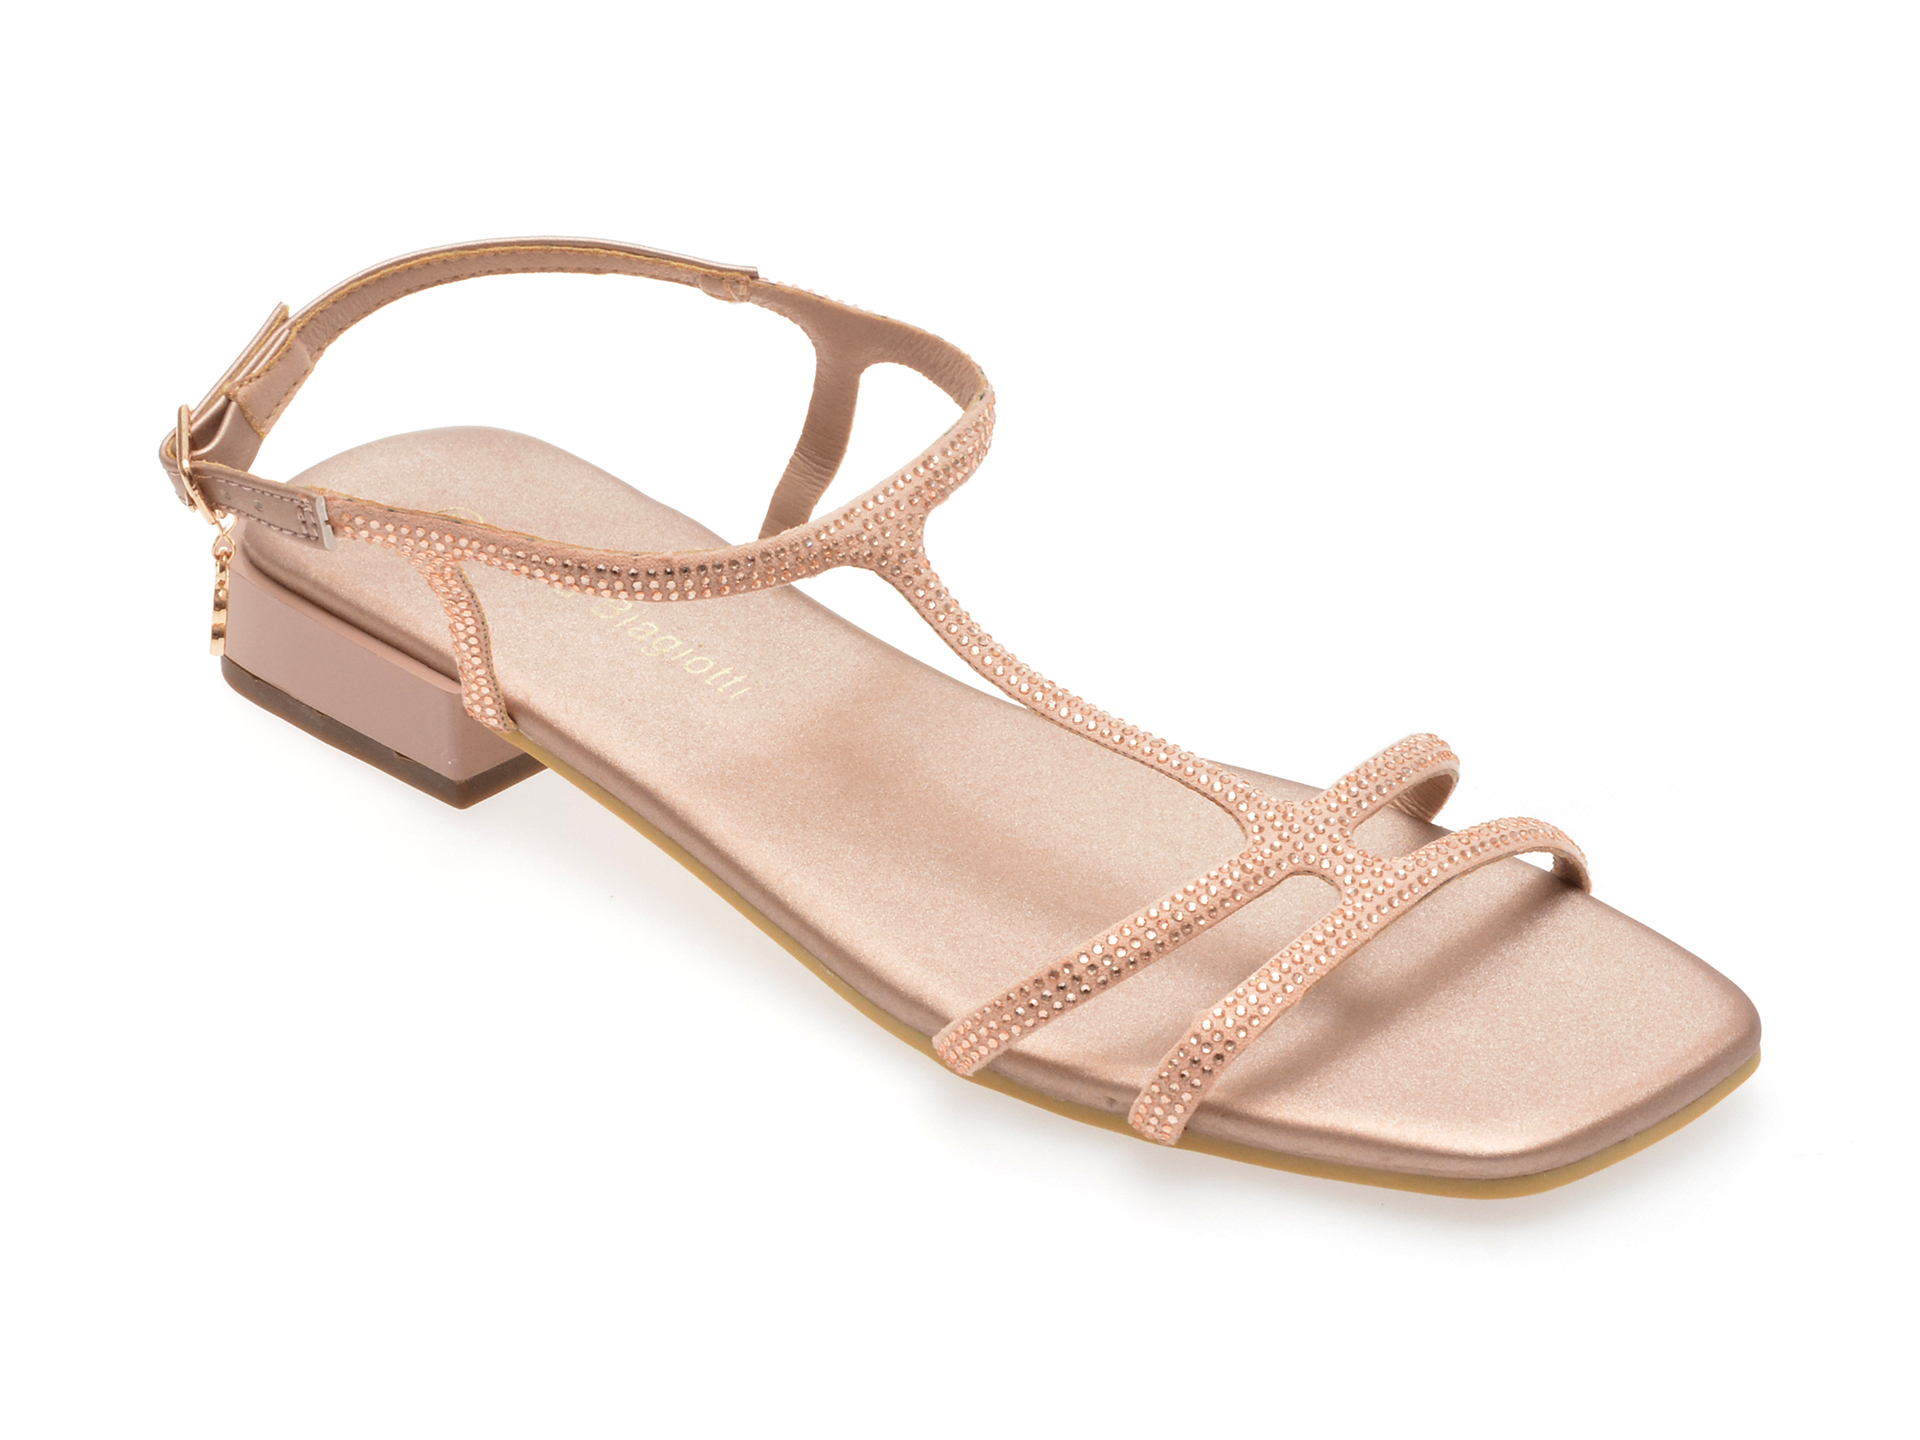 Sandale Casual Laura Biagiotti Nude, 8490, Din Material Textil